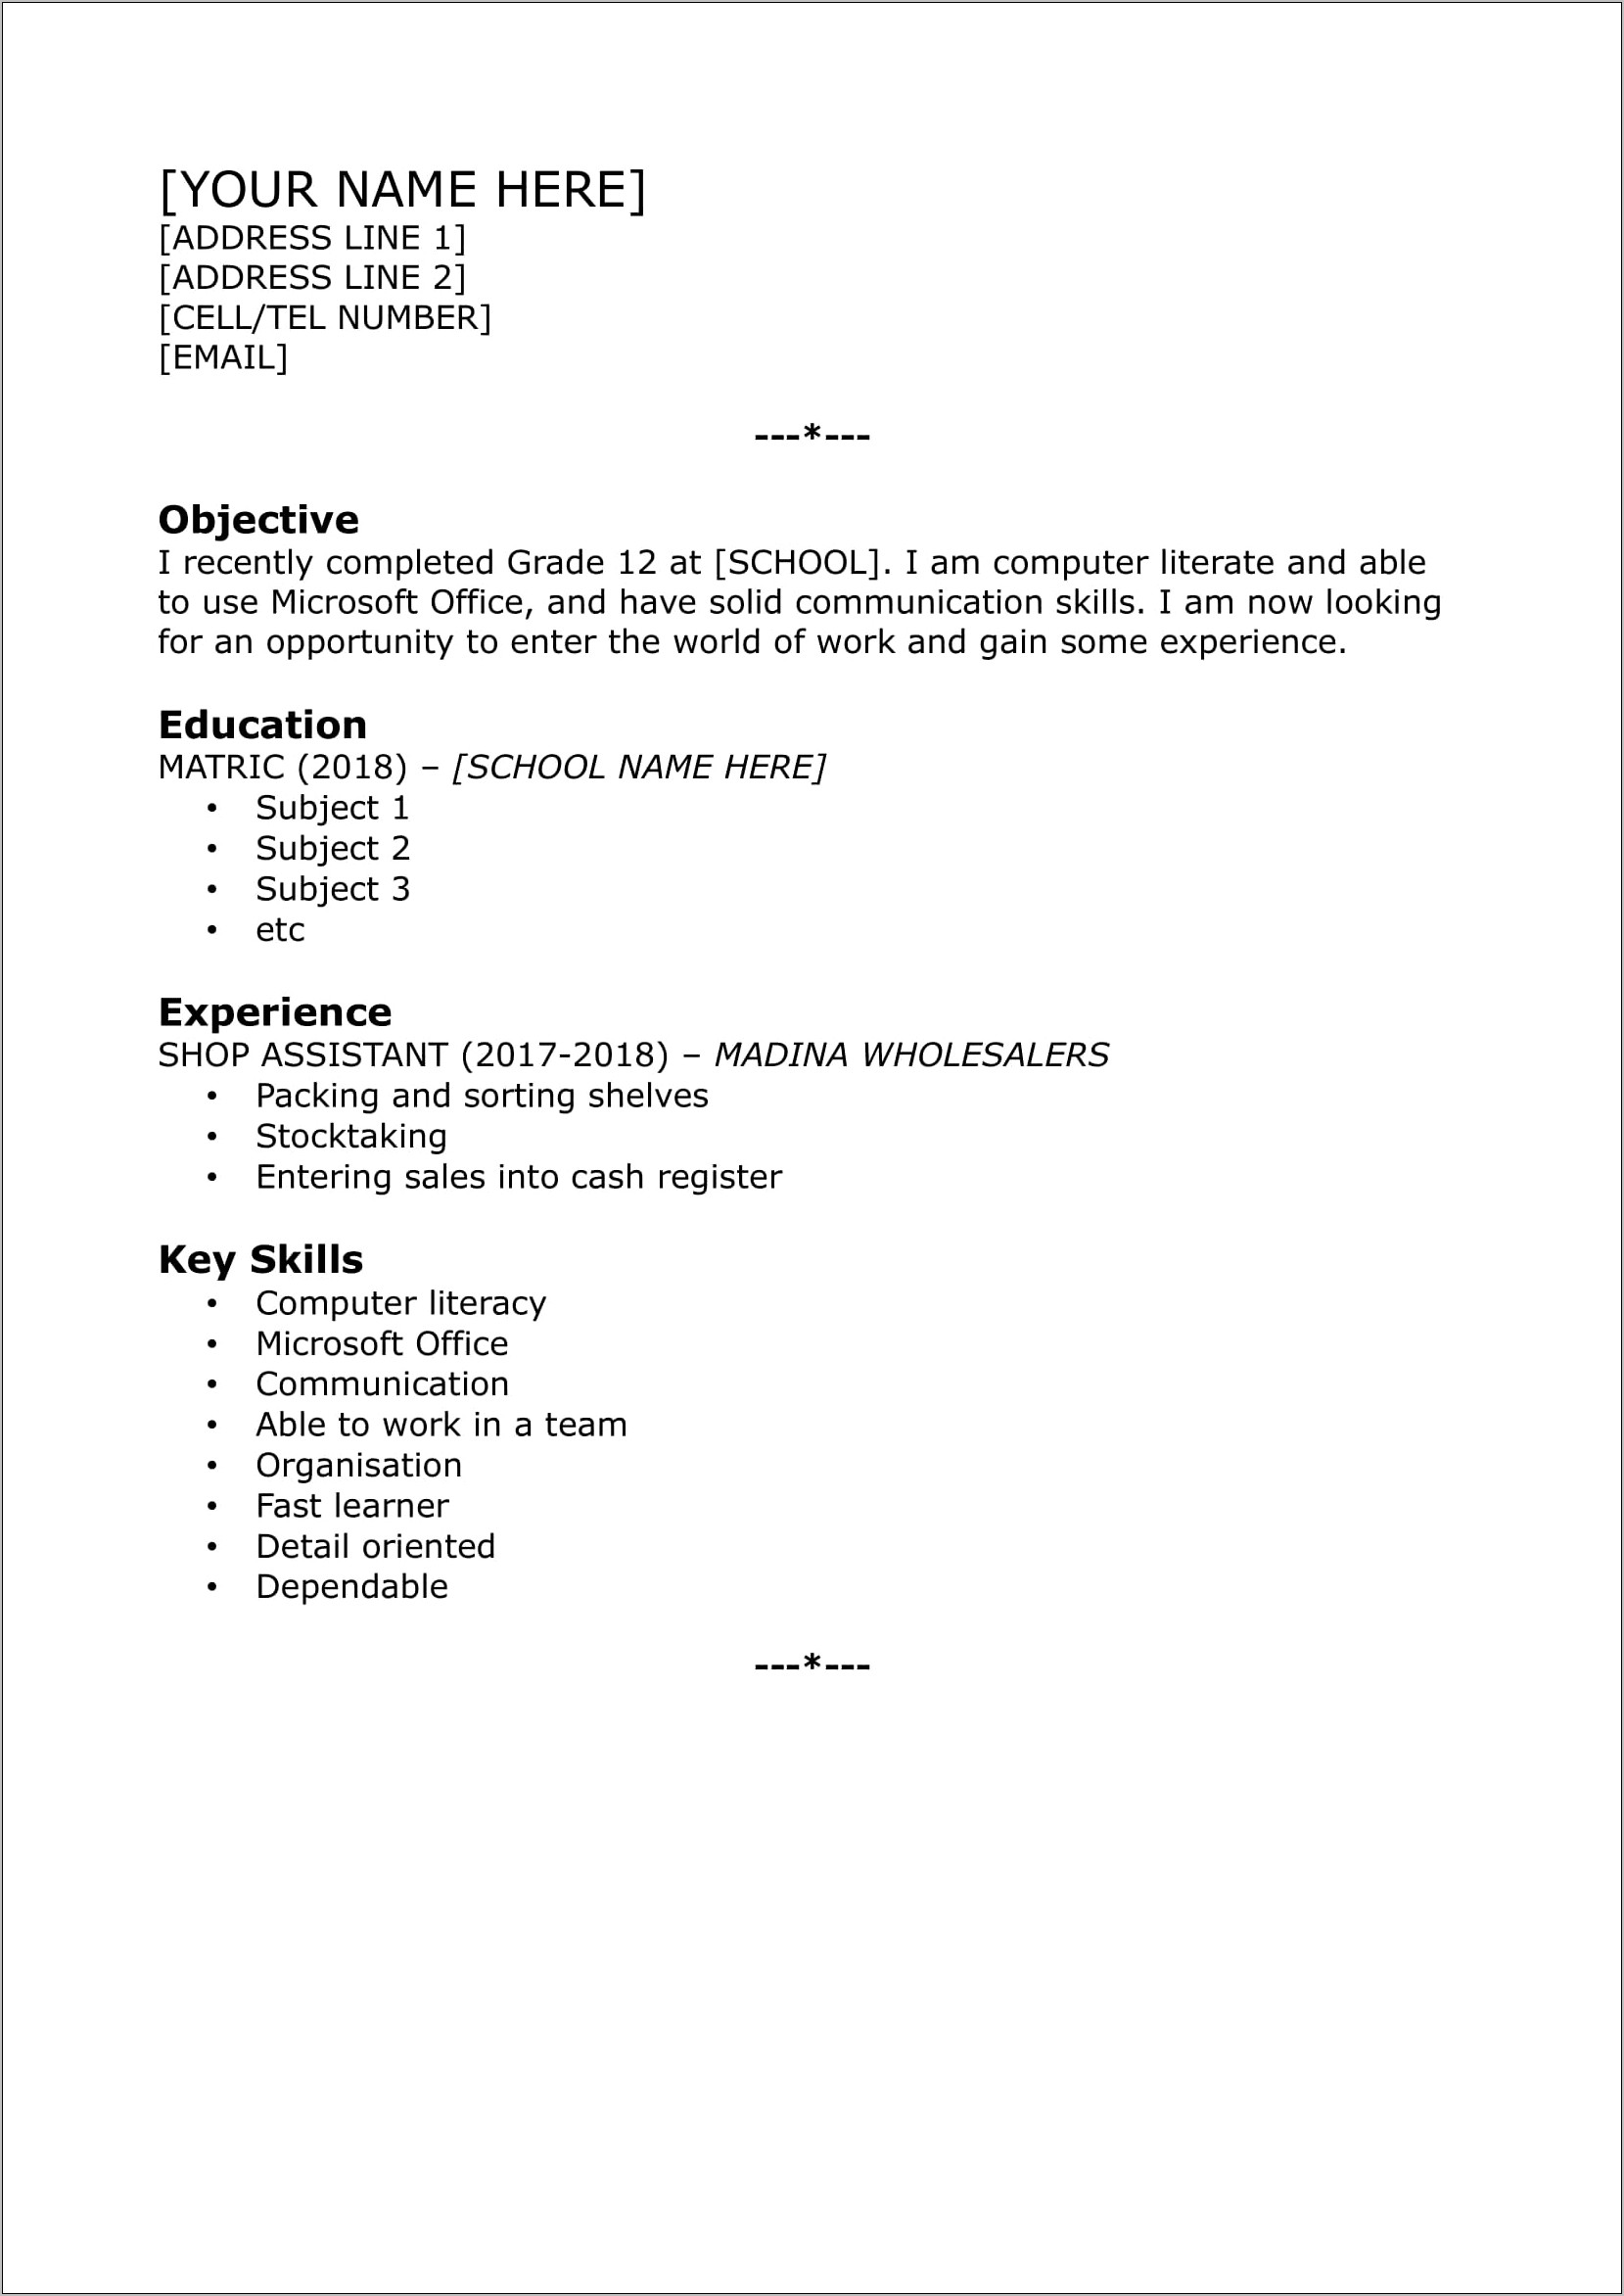 sample-resume-format-for-12th-pass-student-resume-example-gallery